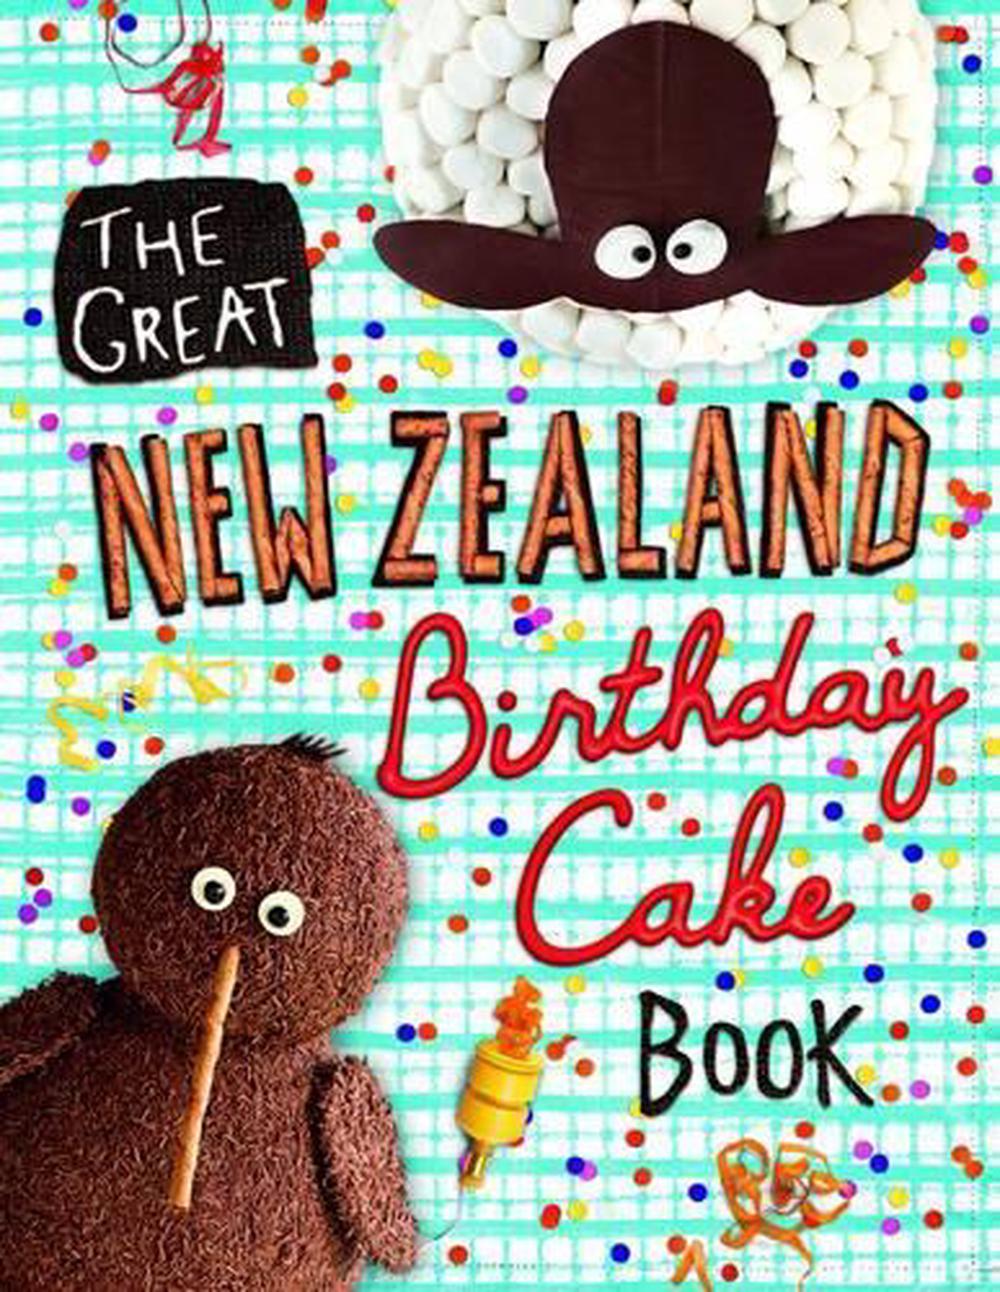 The Lolly Cake Recipe, the Sweetest Treat from New Zealand